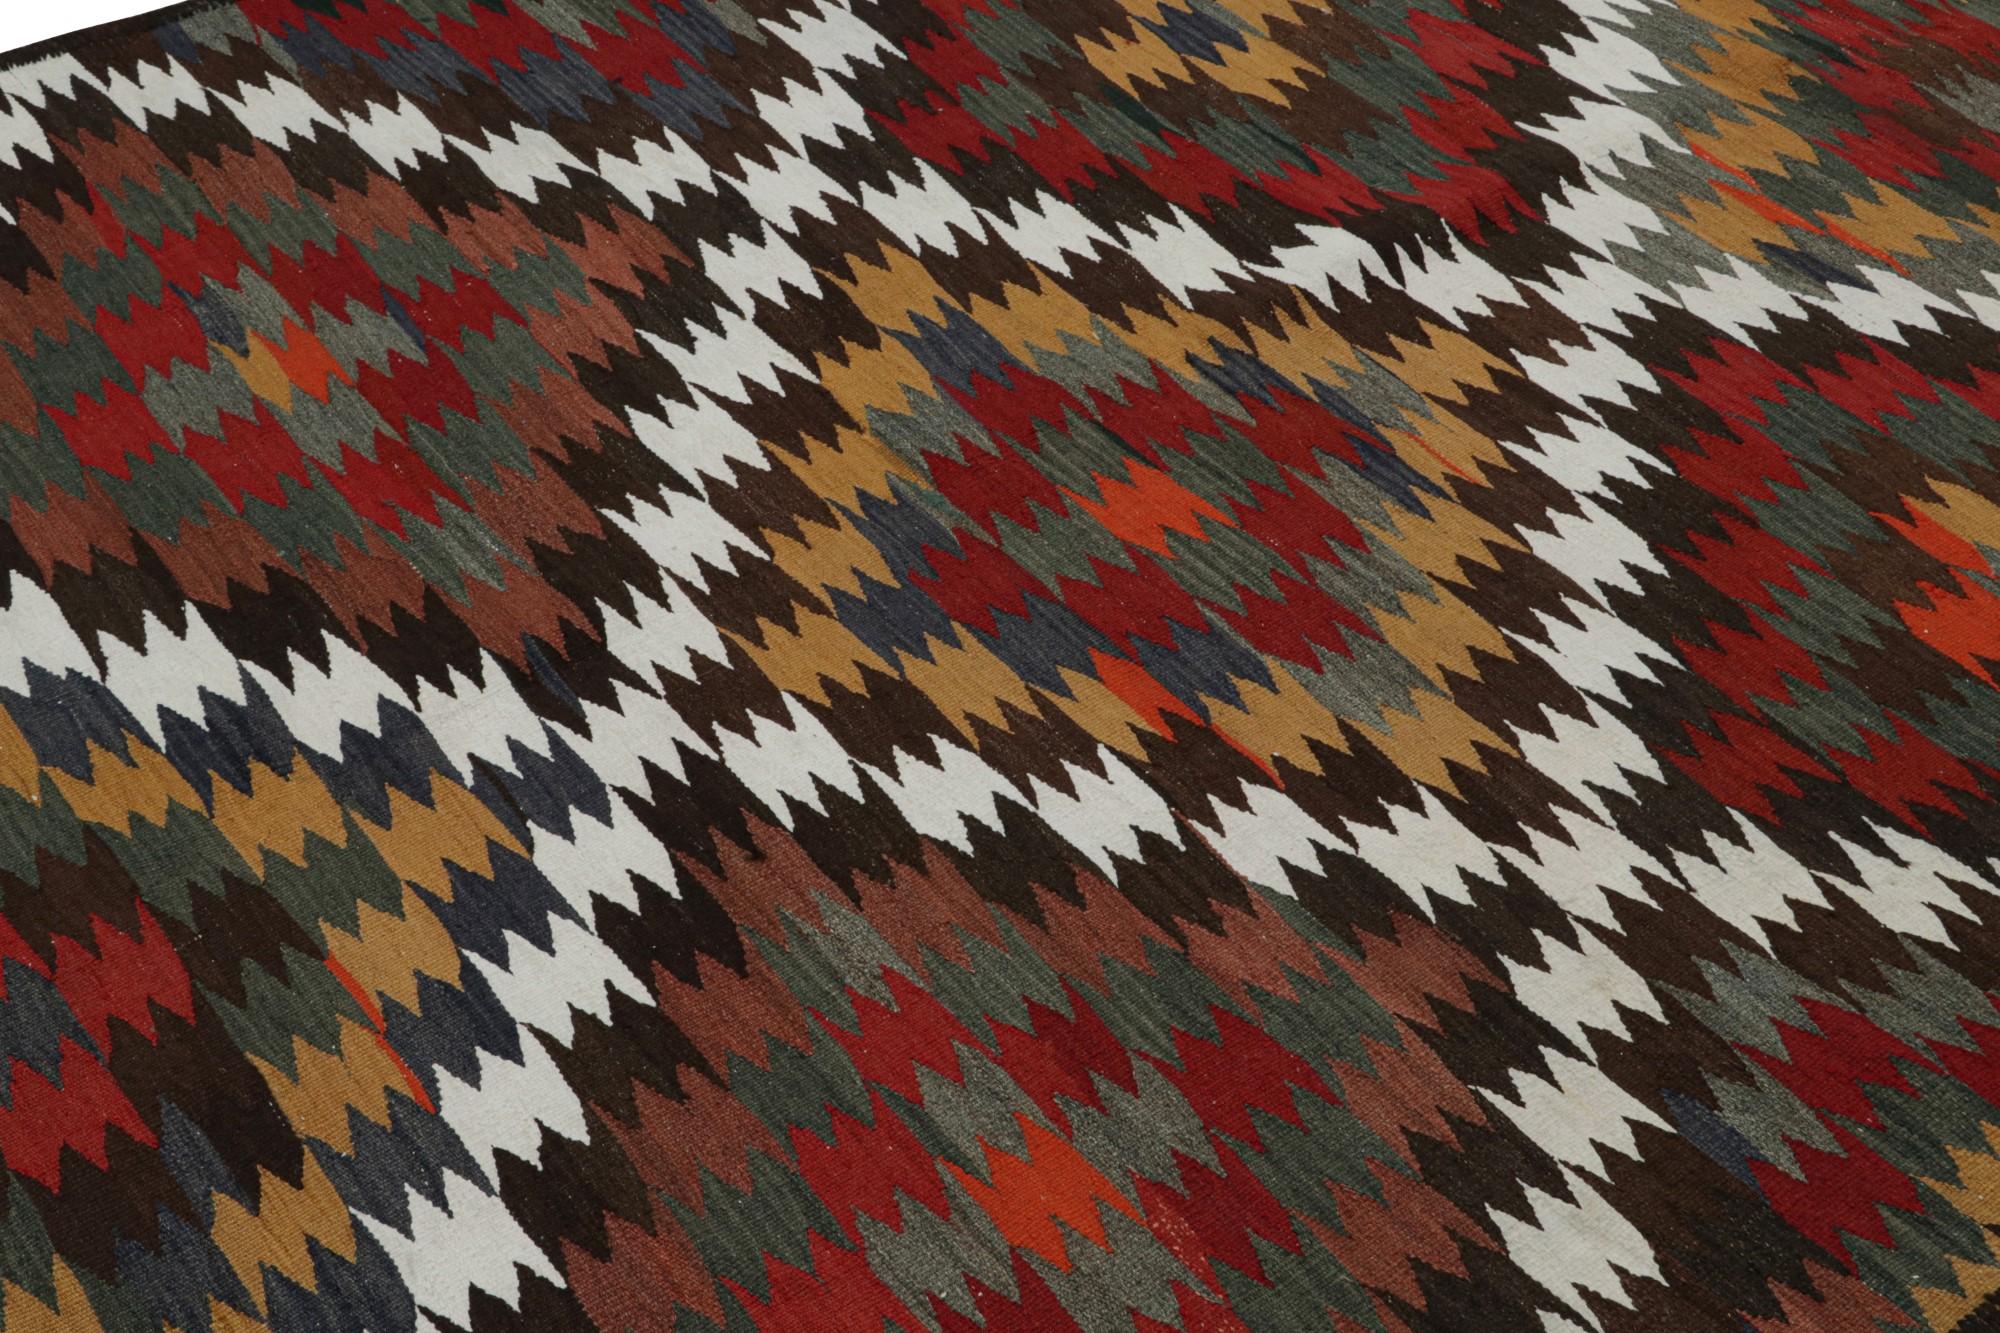 Vintage Afghan Tribal Kilim Rug, with Geometric Patterns, from Rug & Kilim  In Good Condition For Sale In Long Island City, NY